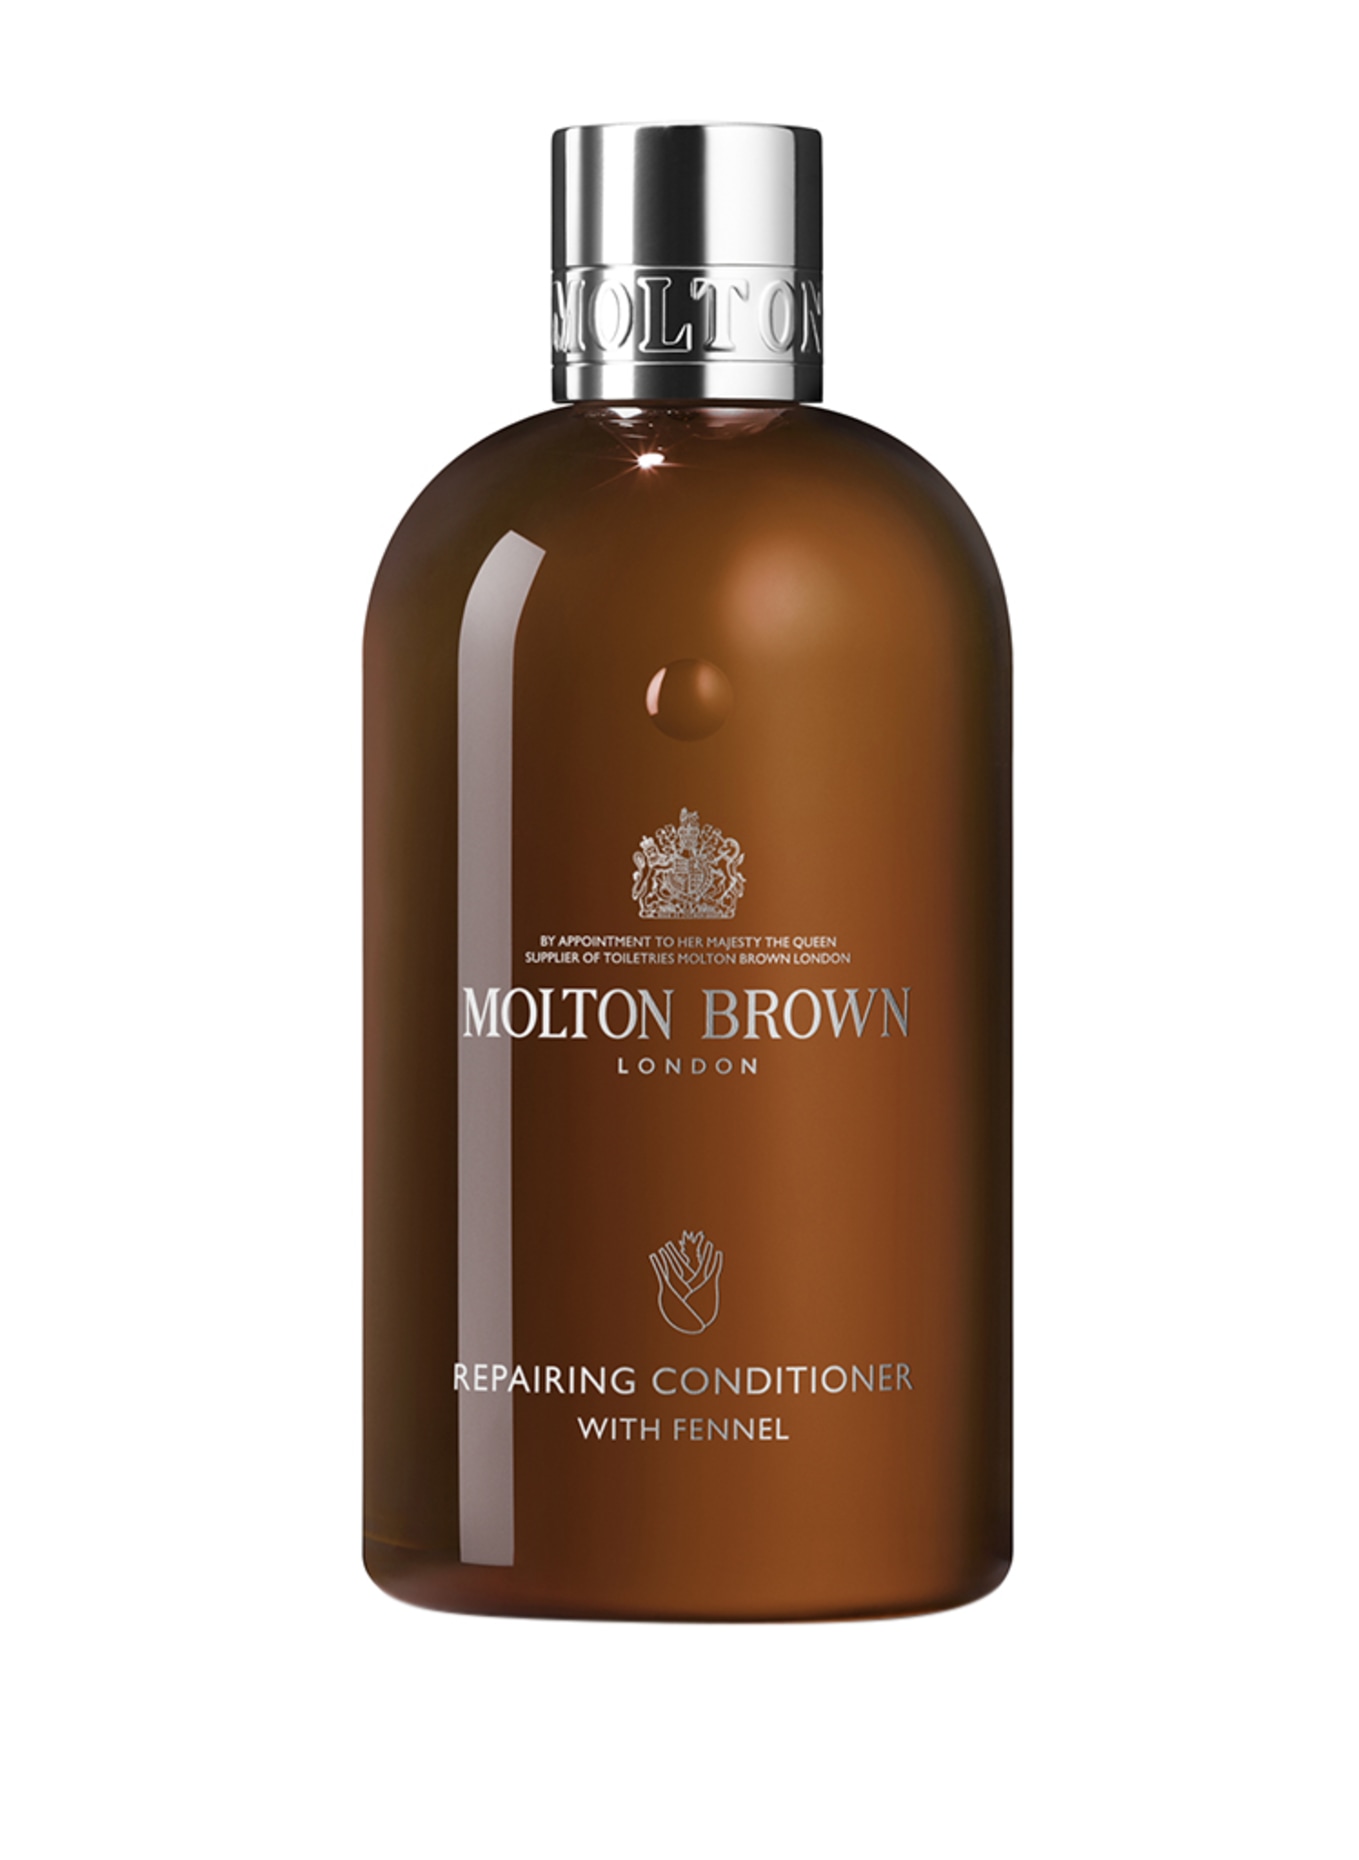 MOLTON BROWN REPAIRING CONDITIONER WITH FENNEL (Obrazek 1)